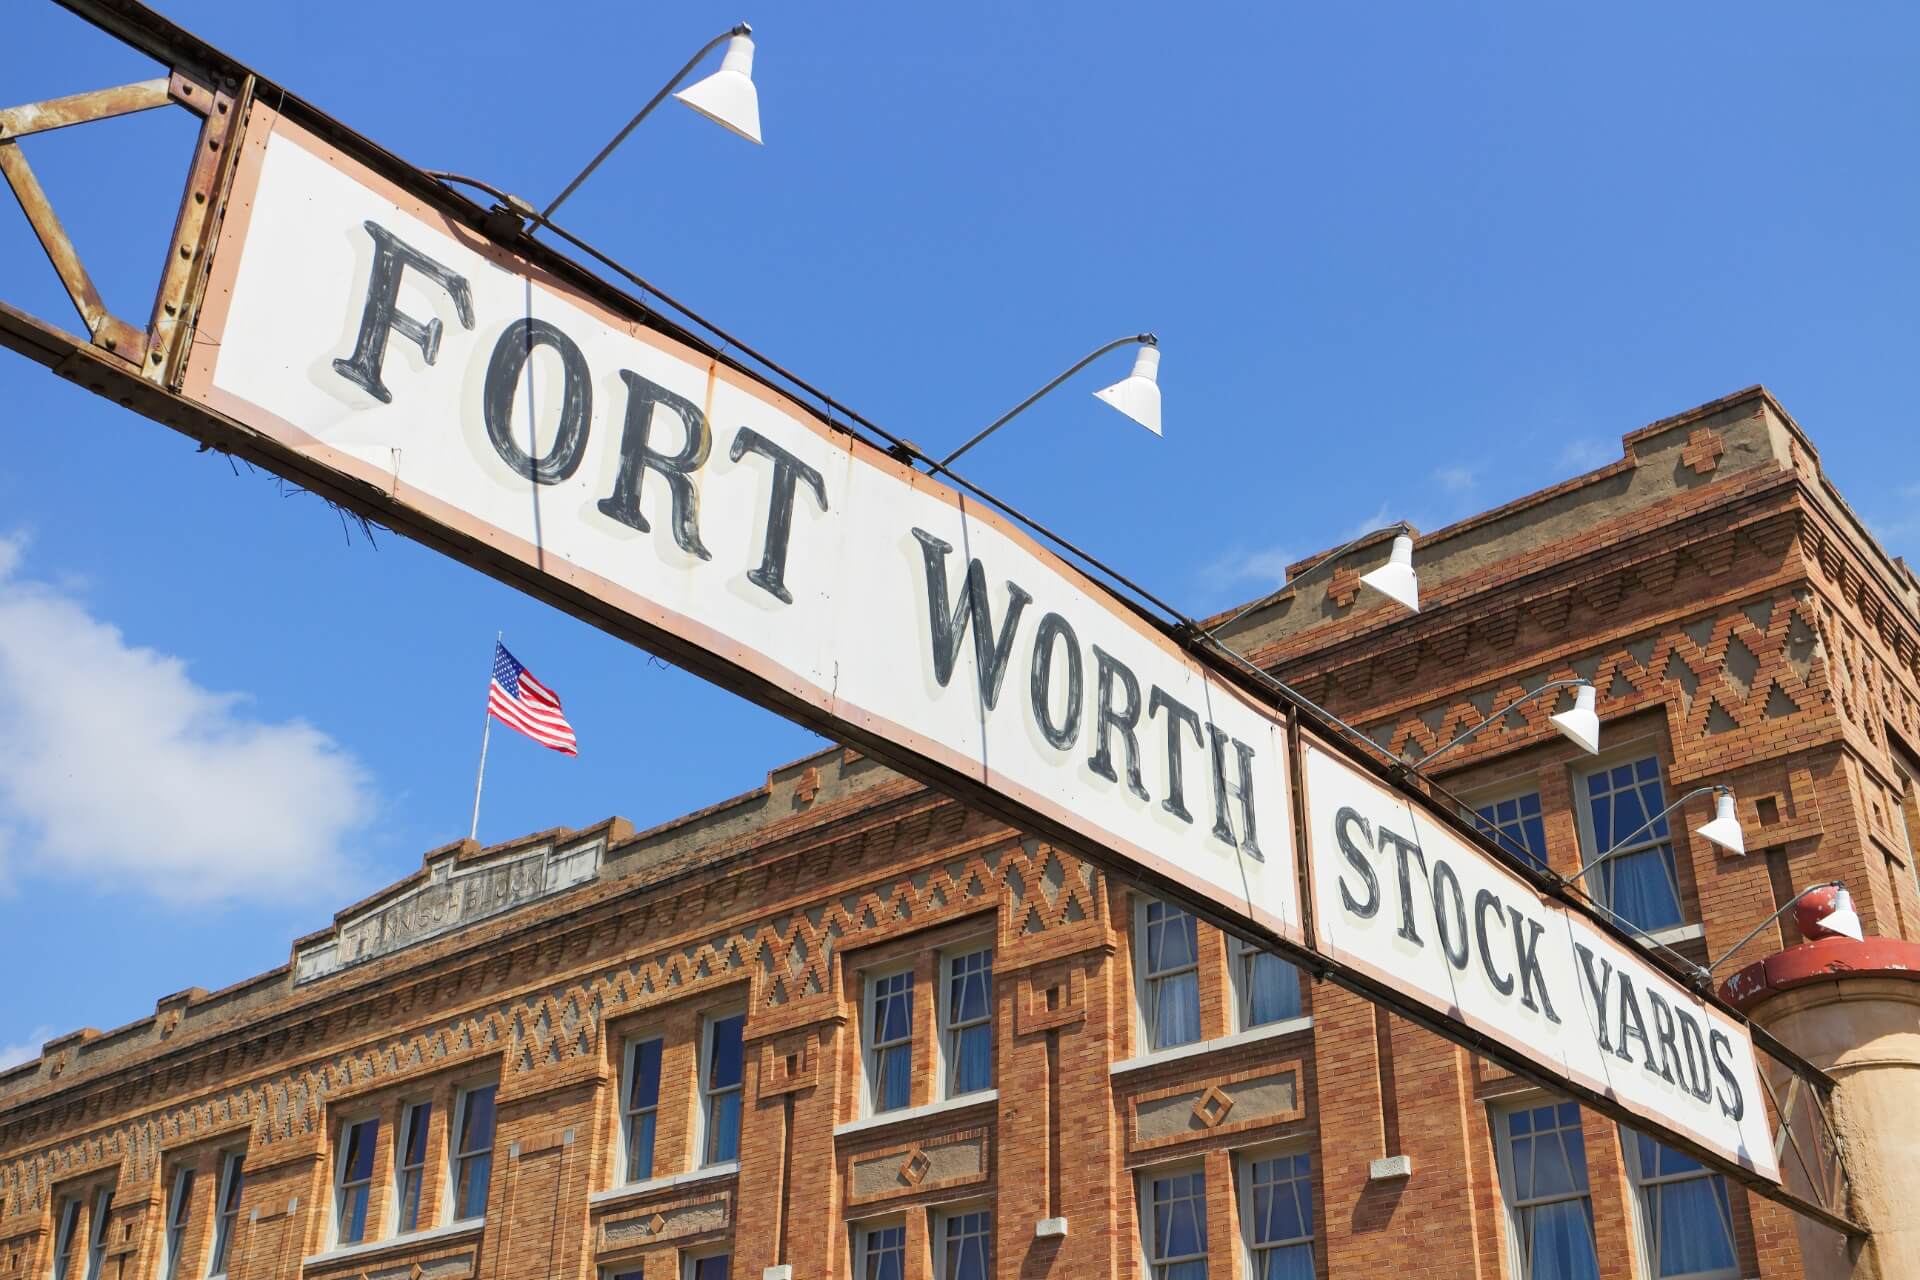 Fort Worth, Texas - historic district